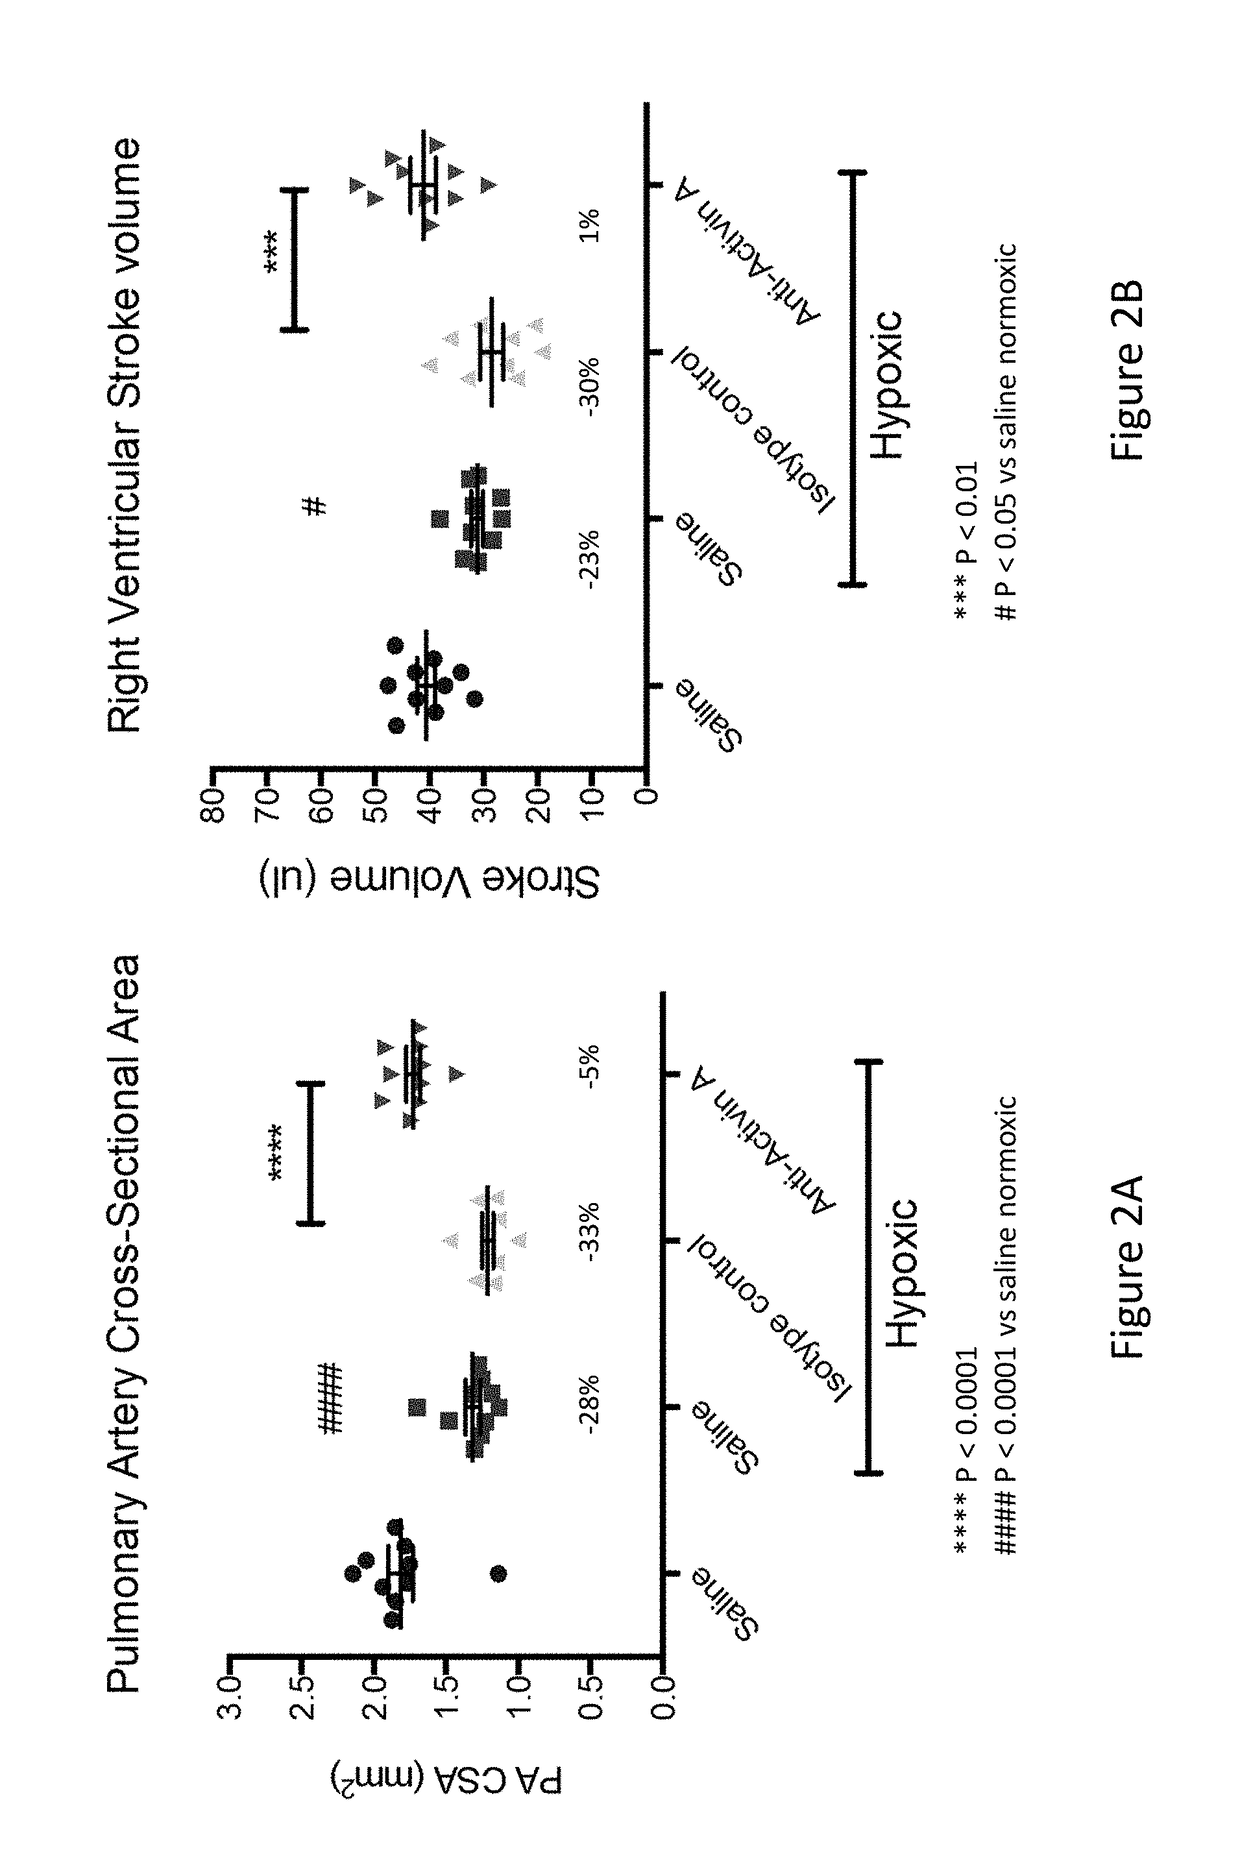 Anti-activin a antibodies and methods of use thereof for treating pulmonary arterial hypertension